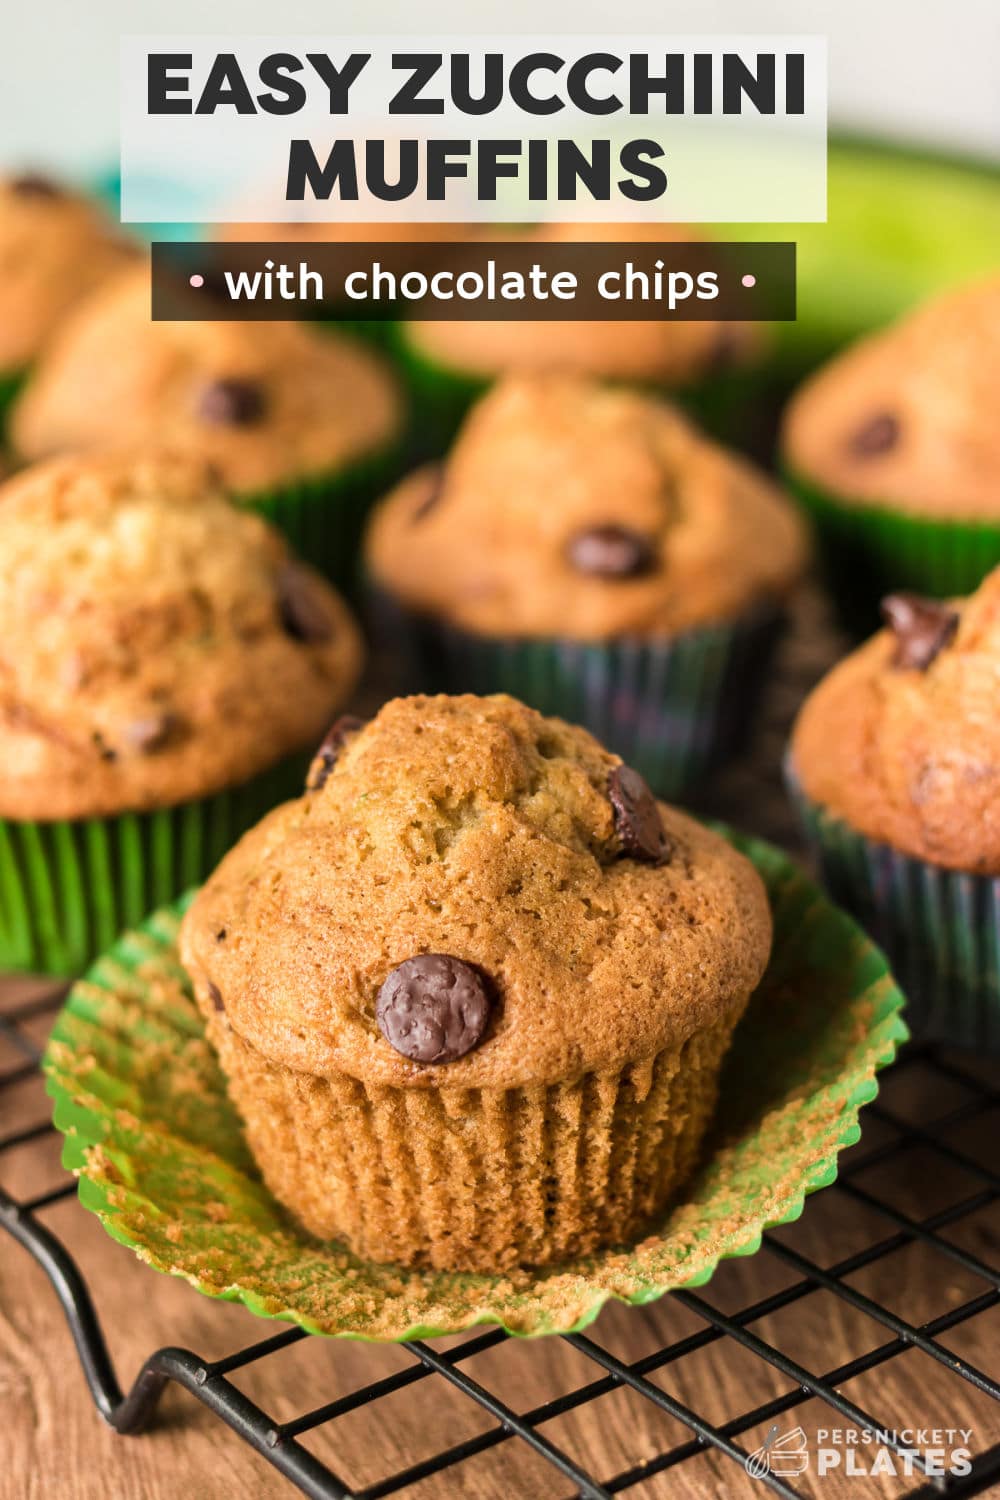 Chocolate Chip Zucchini Muffins are soft, moist, and loaded with chocolate chips! They're baked and ready to eat in just under 40 minutes and they're ridiculously easy to make. Using simple baking staples, fresh zucchini, and melty chocolate chips these tasty muffins are going to become your new favorite snack! | www.persnicketyplates.com